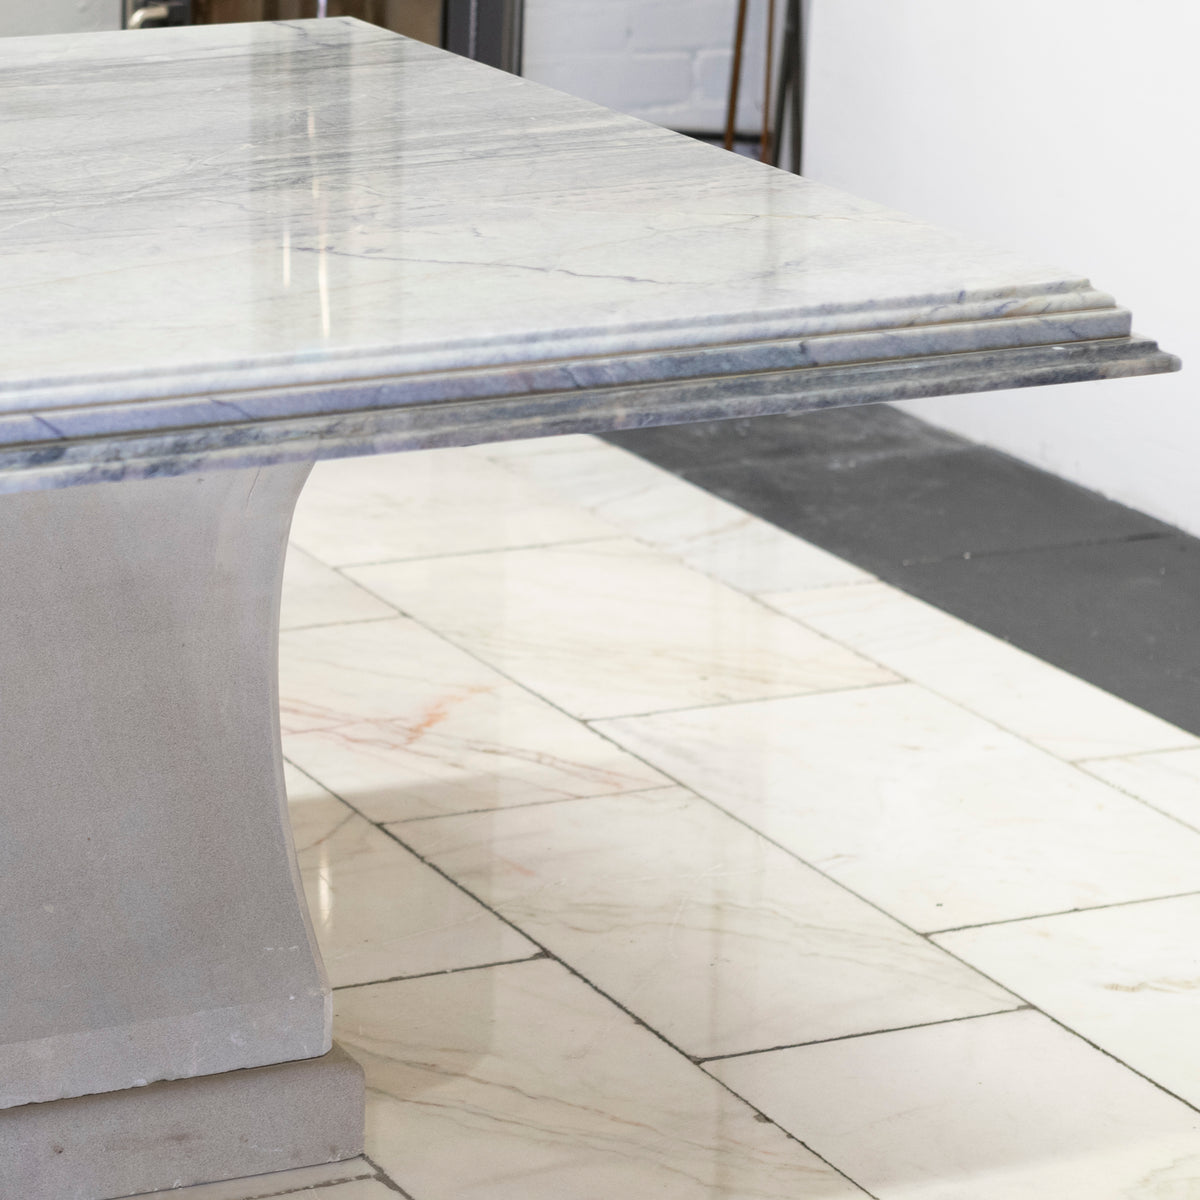 Reclaimed Grand Marble Top Banquet Table with Stone Plinths | The Architectural Forum